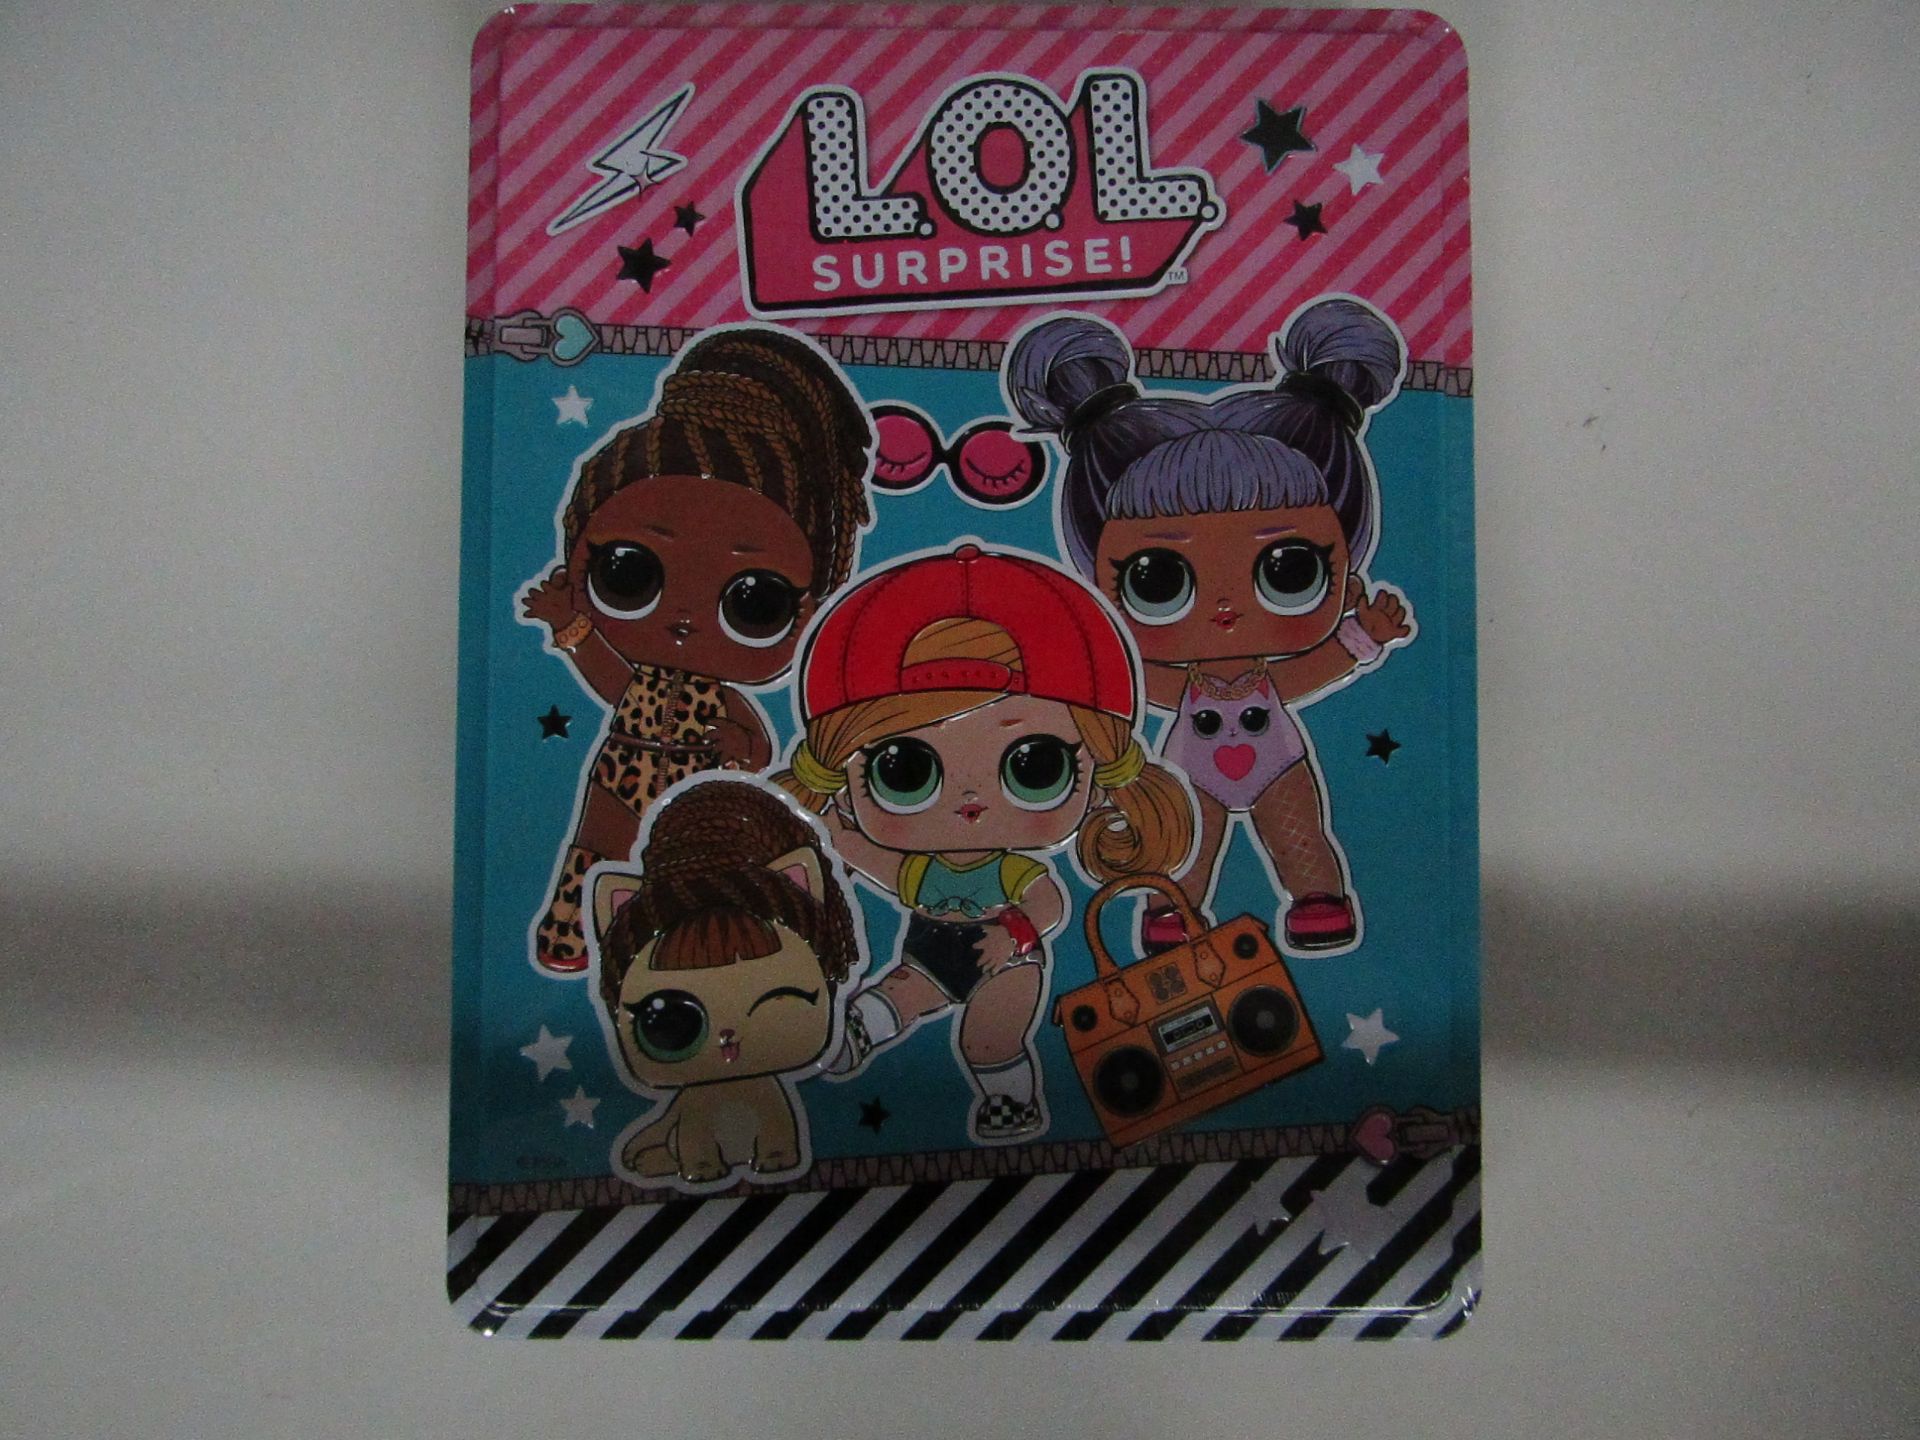 4x LOL Surprise - 4 Exciting Books With Stickers - All Unused & Packaged.